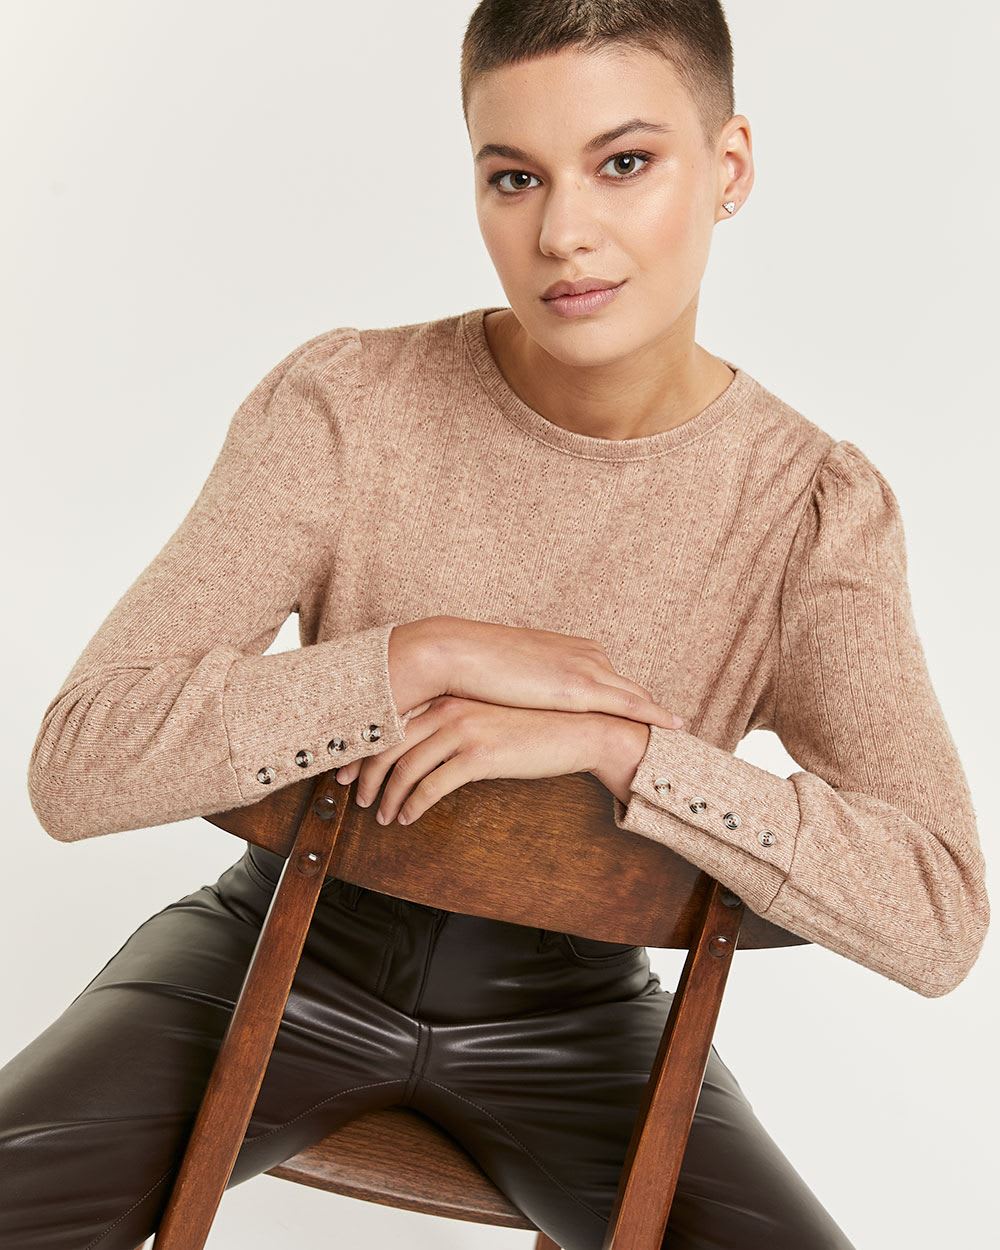 Pointelle Sweater with Buttoned Cuffs